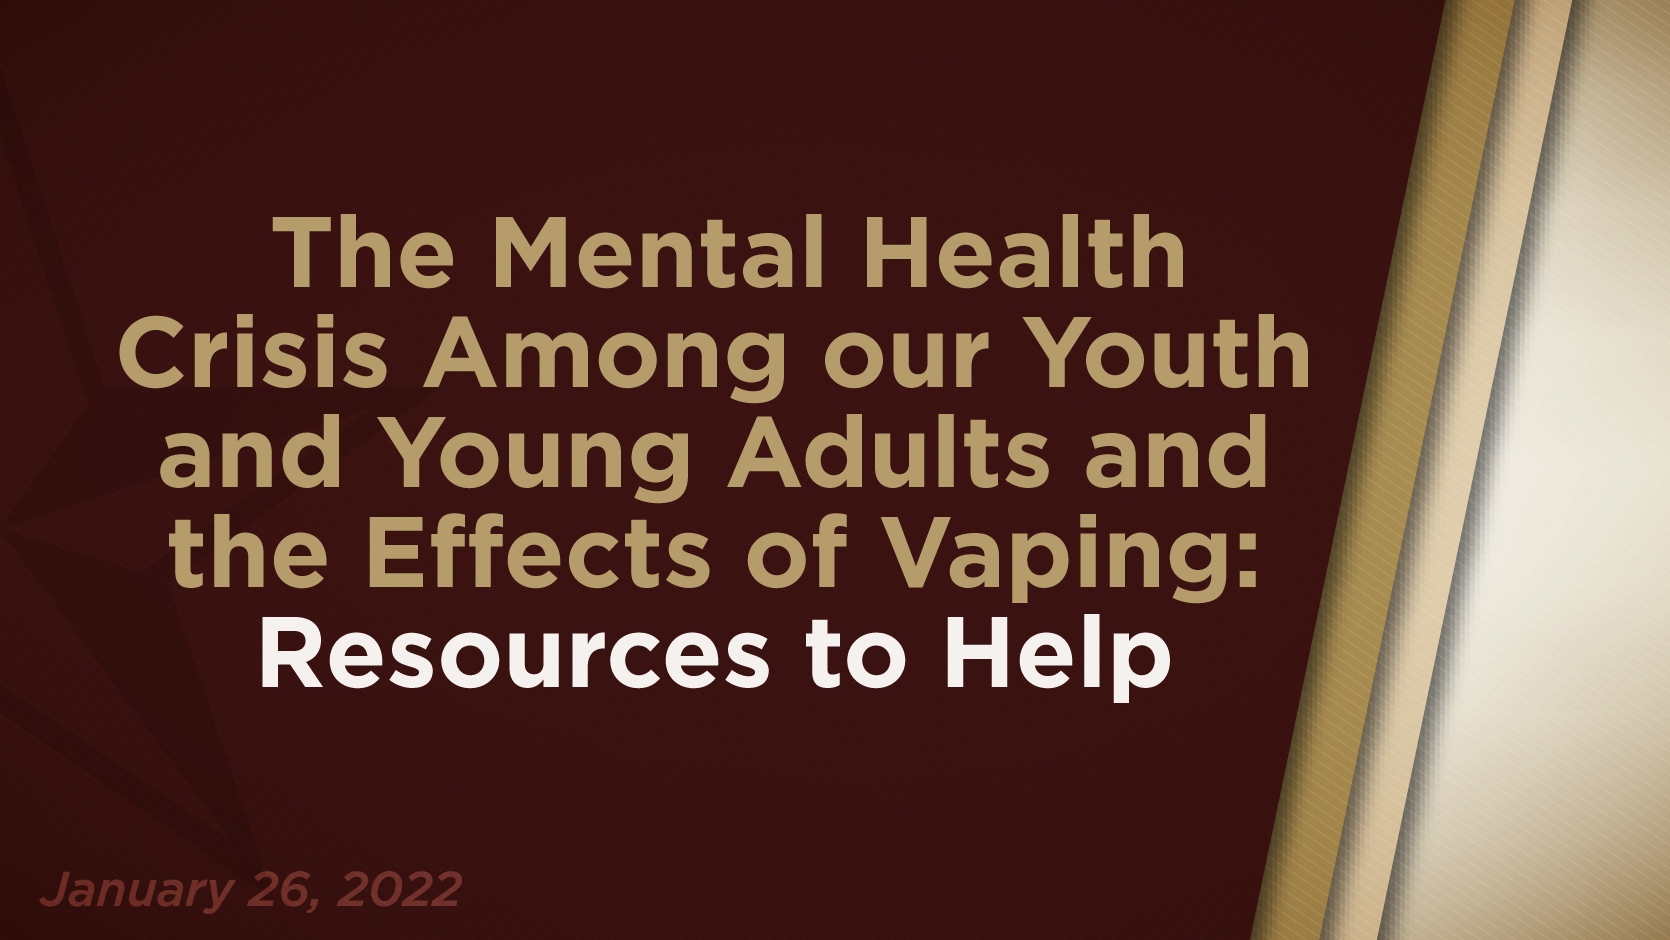 thumbnail for mental health crisis among youth and young adult conference